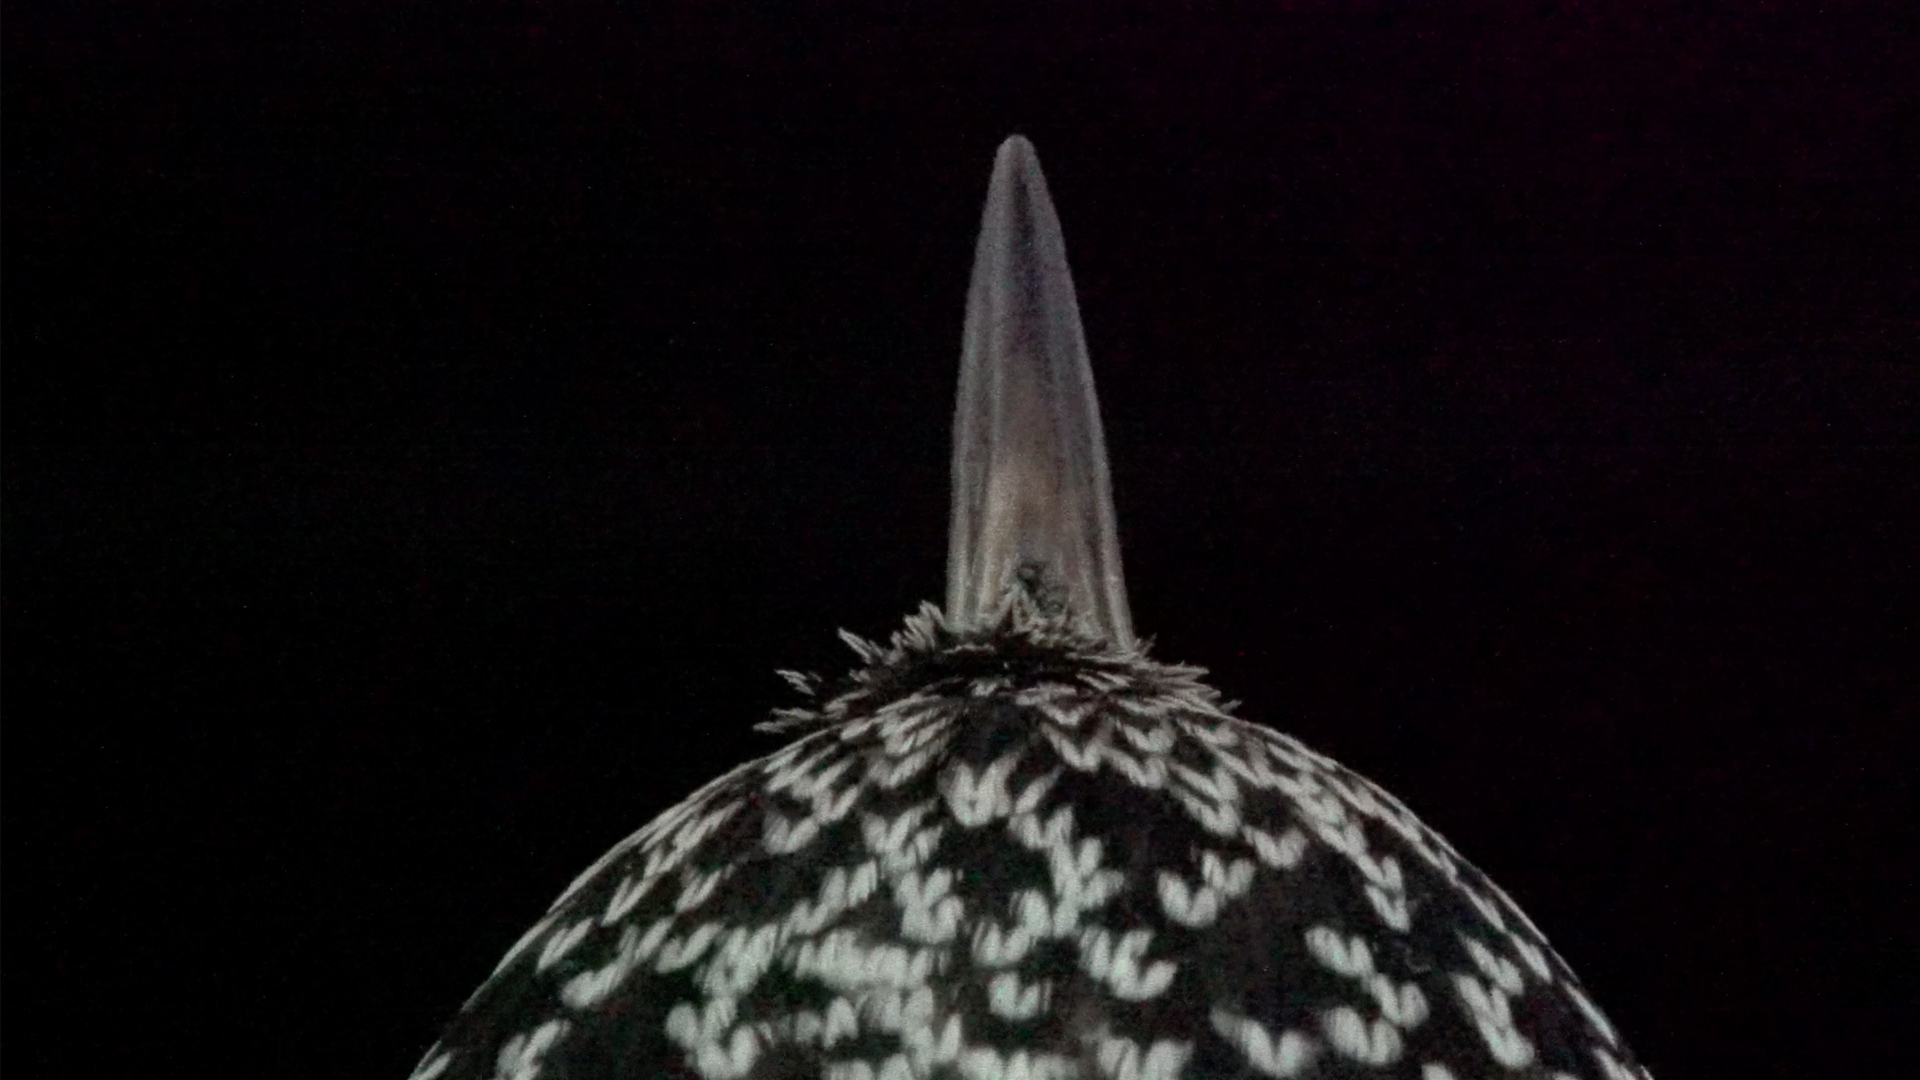 close up of a bird beak on a black and white feathered head against a black background, viewed from the top so the beak looks like pointing upwards. 